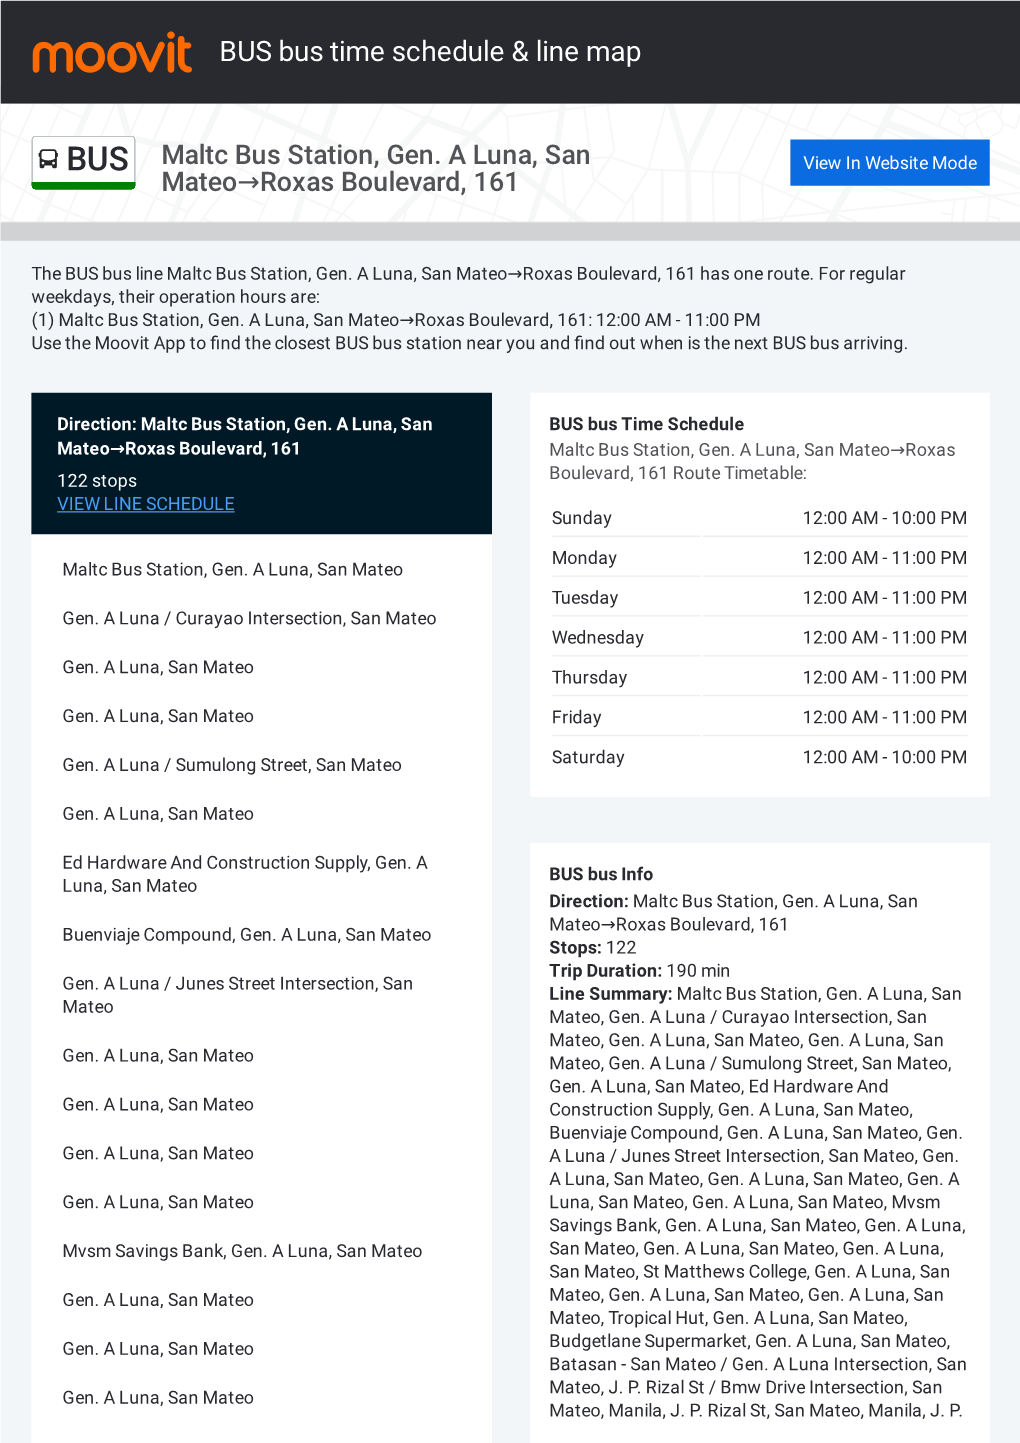 BUS Bus Time Schedule & Line Route